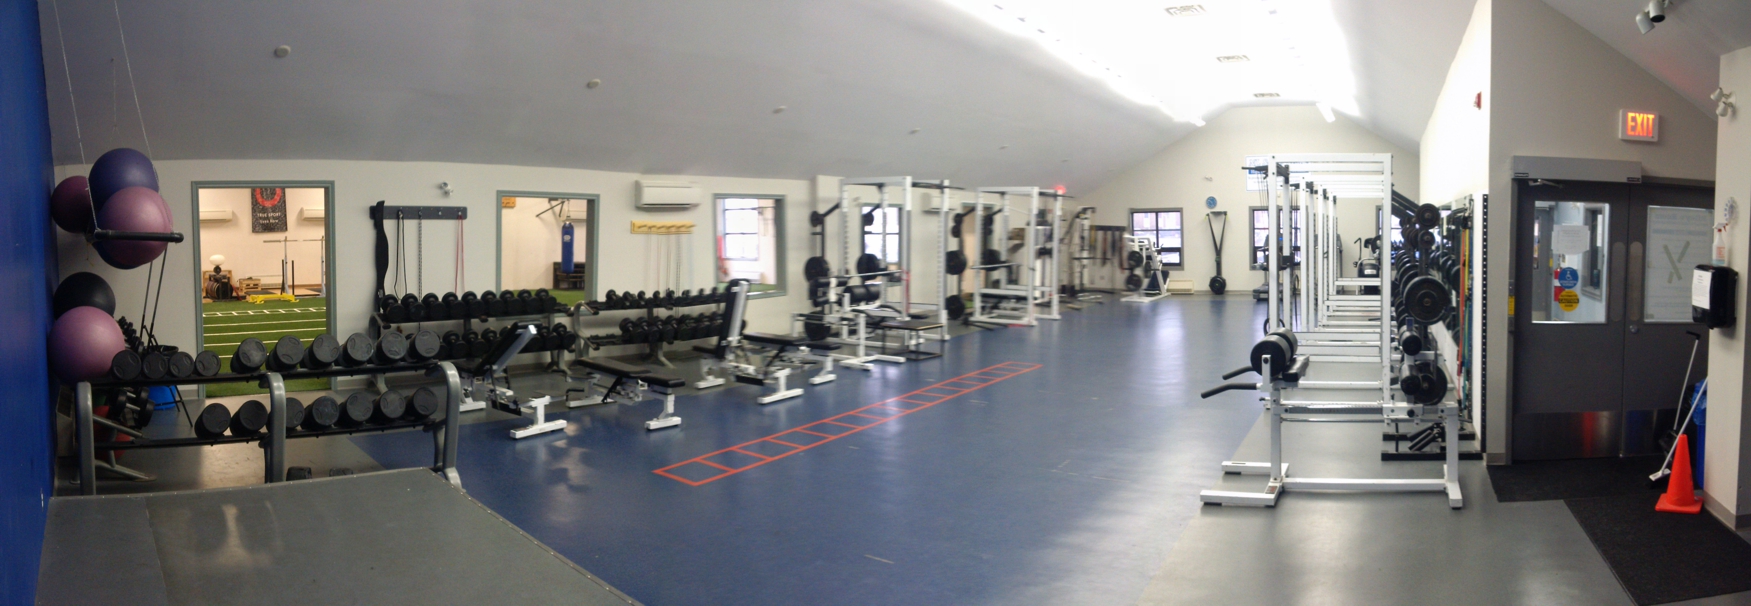 NL Sports Centre Riley's Room Strength and Conditioning Area